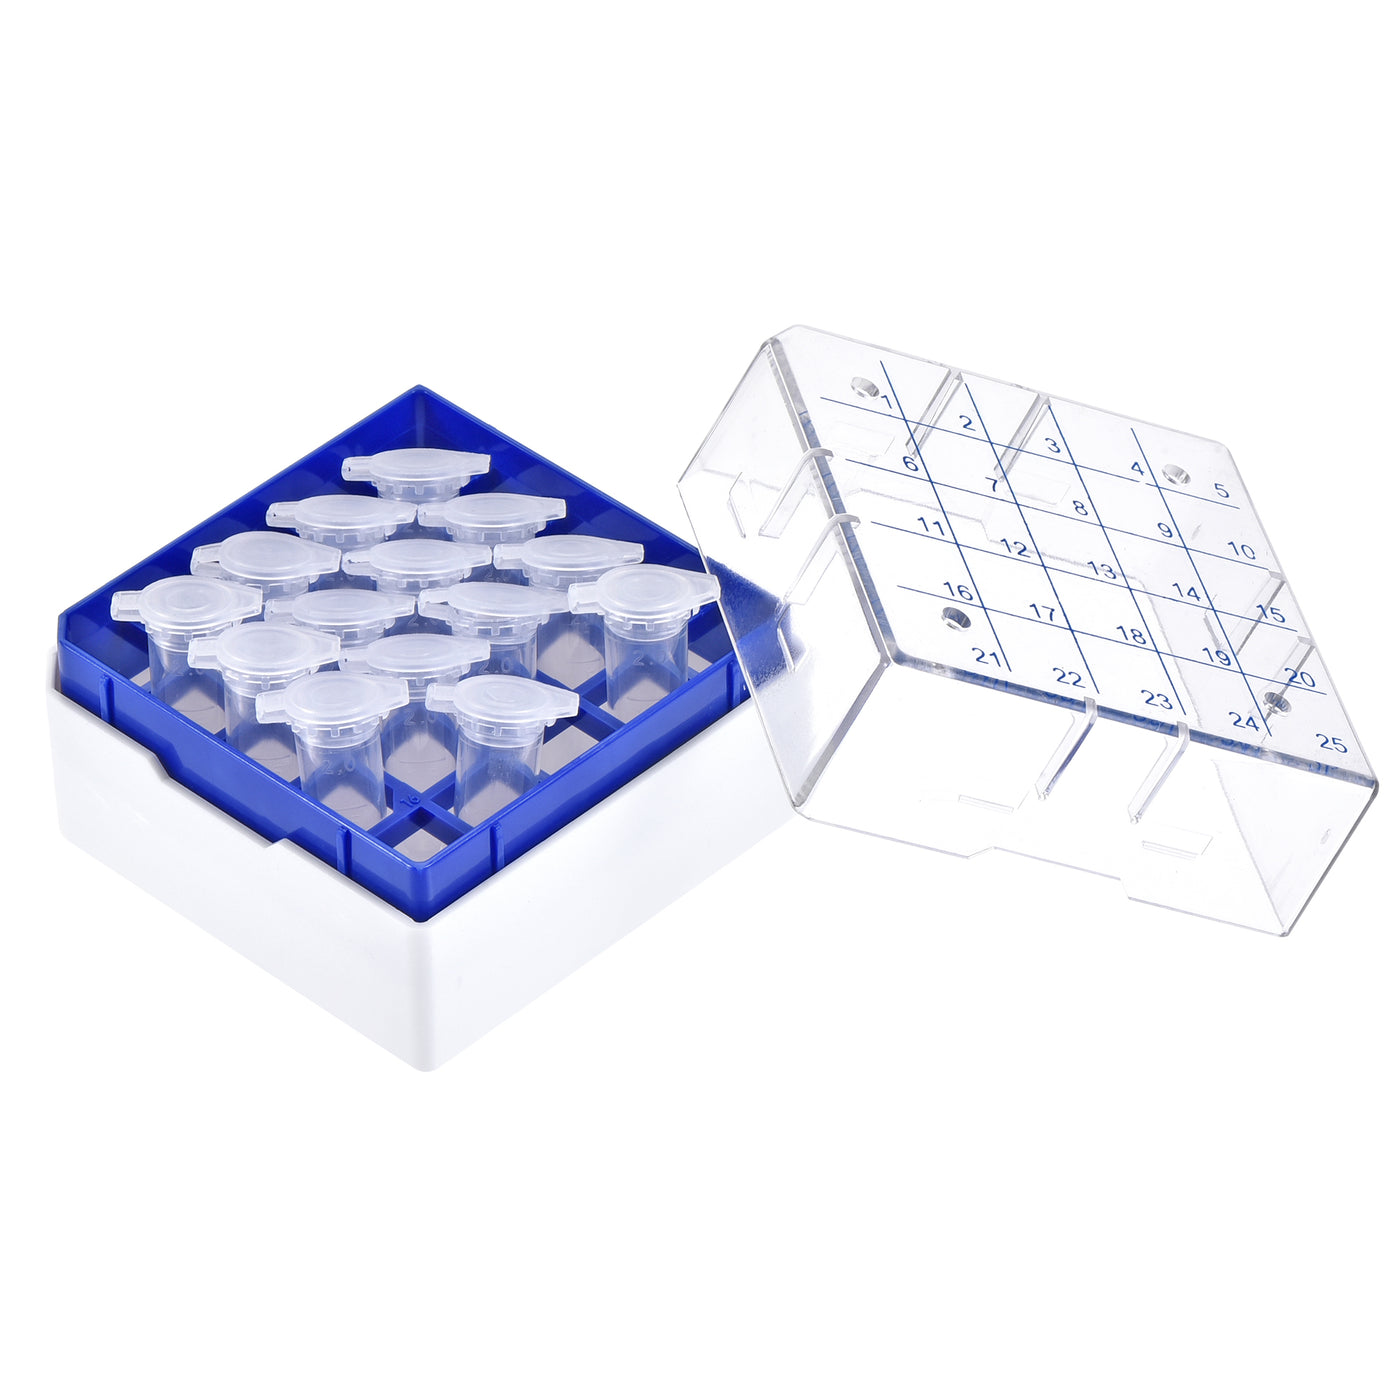 uxcell Uxcell Freezer Tube Box 25 Places Polypropylene Holder Rack for 1.8/2ml Microcentrifuge Tubes, Blue